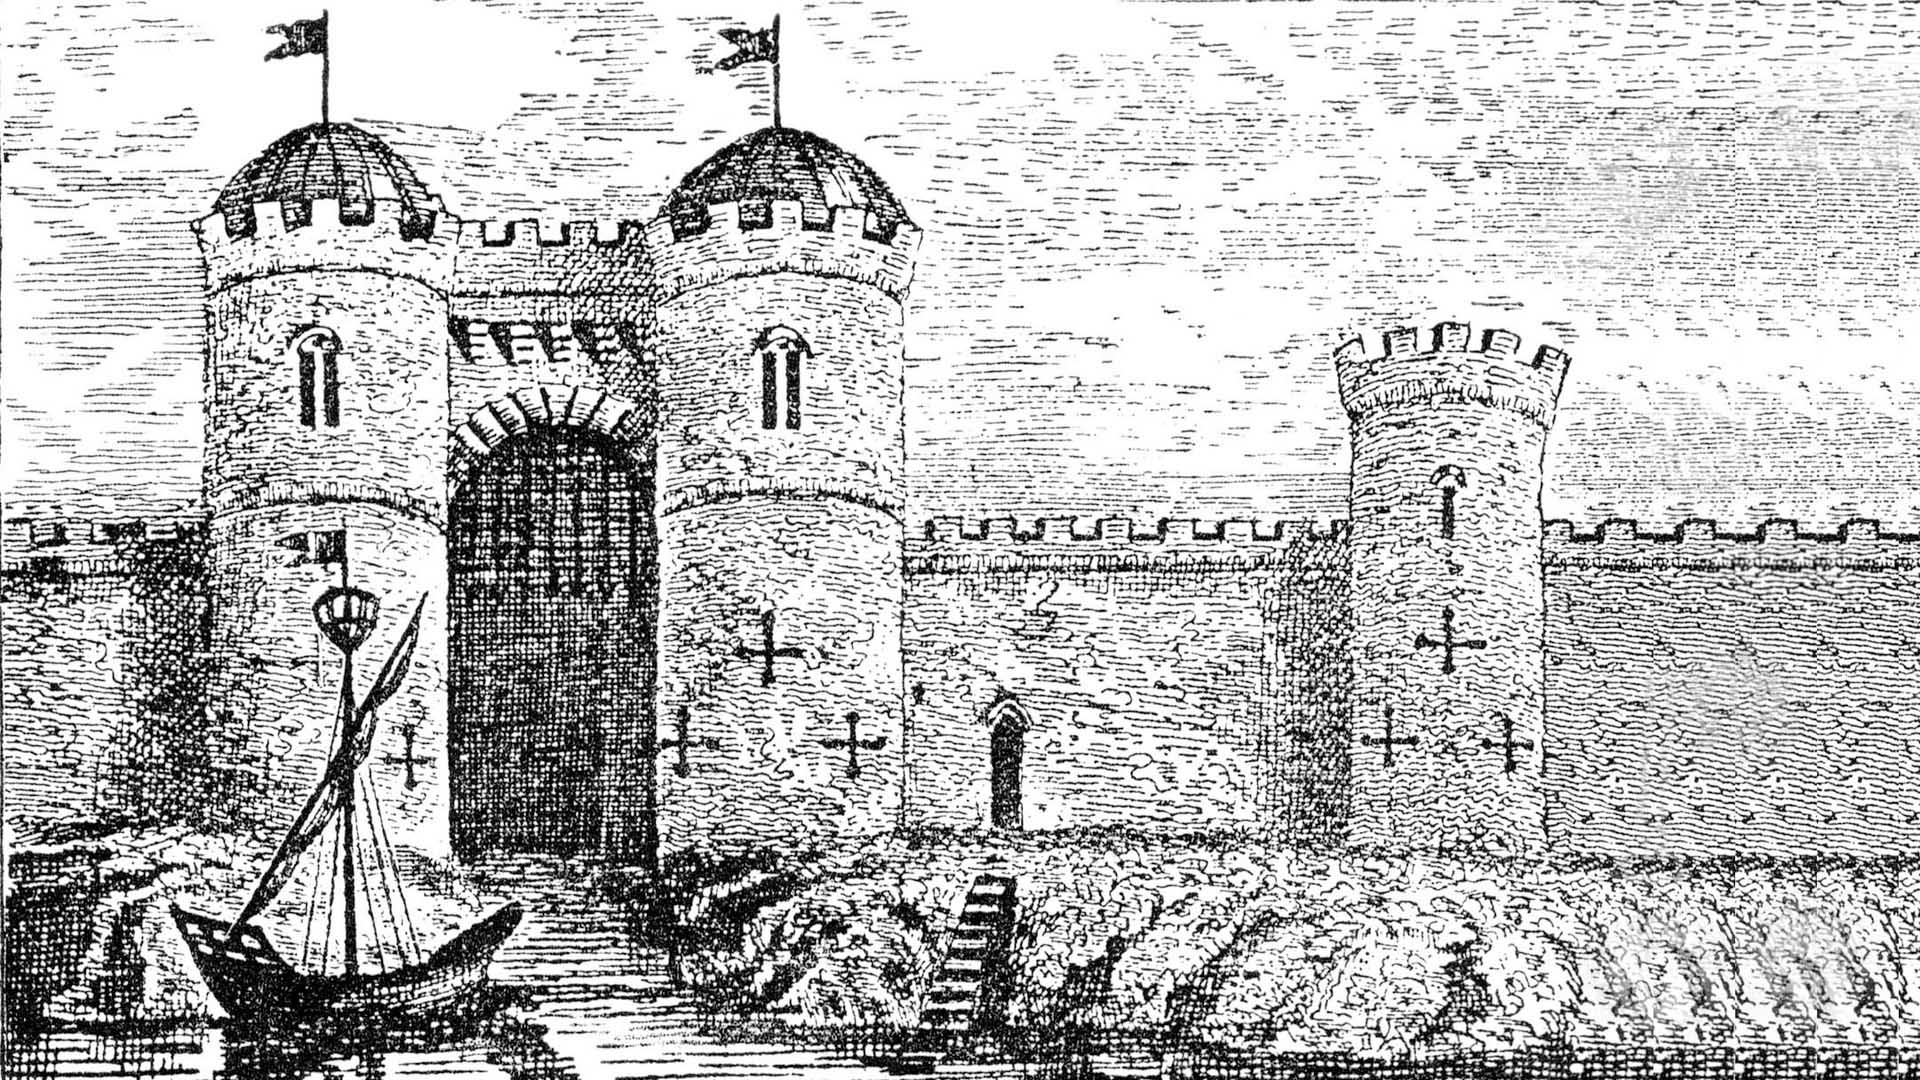 The Norman castle that housed the Tudor mint of Bristol was levelled in the 1650s. From a nineteenth century publication on the city.